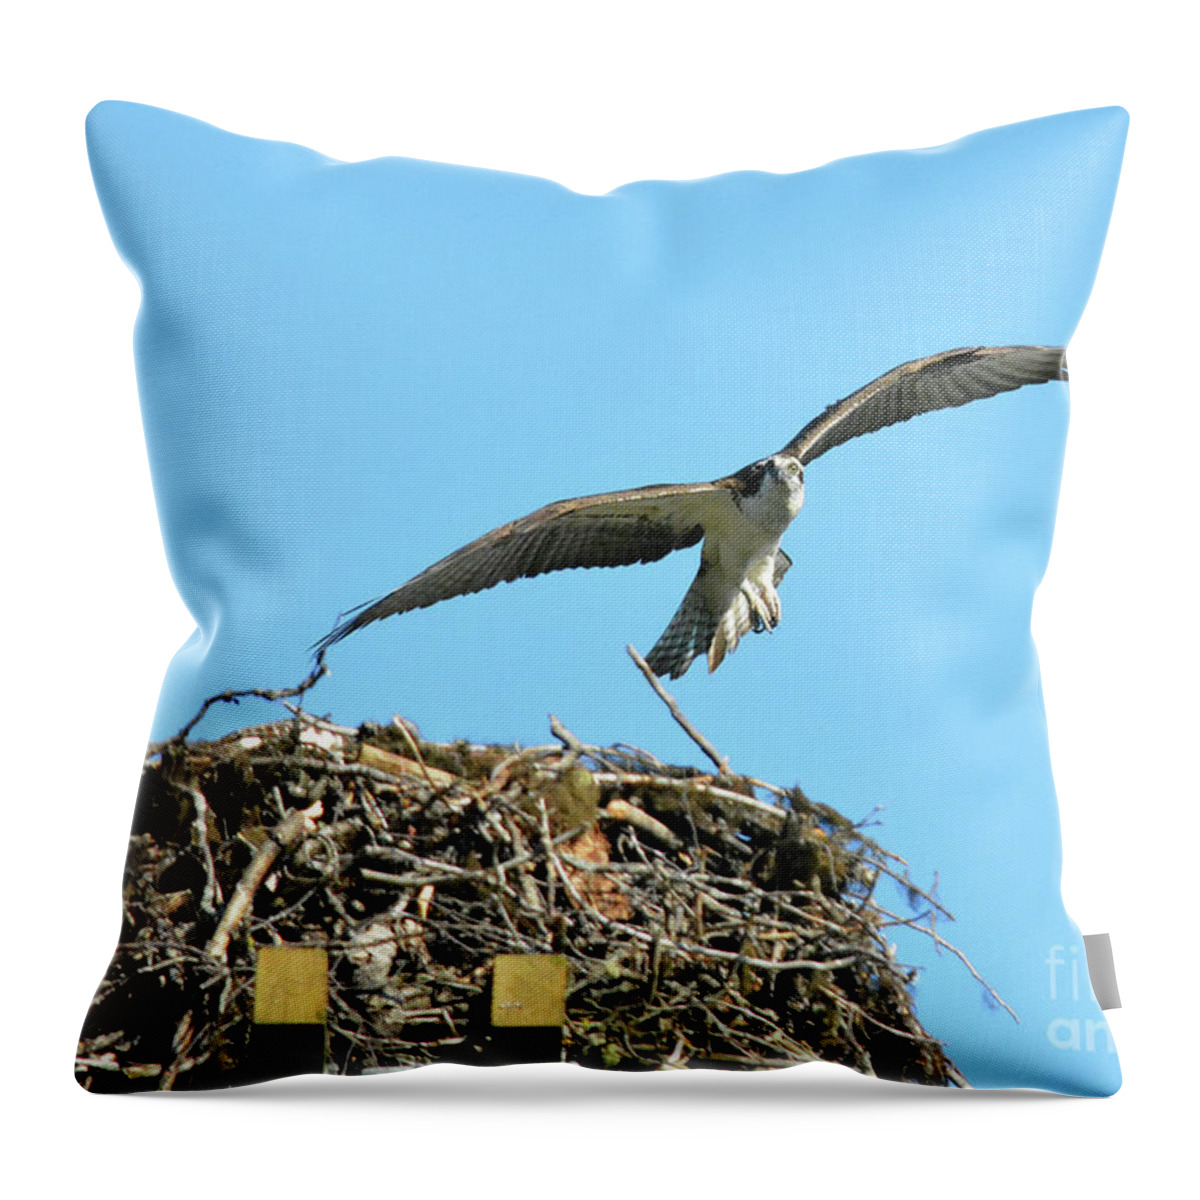 Fly Throw Pillow featuring the photograph Honey I'm Home by Vivian Martin